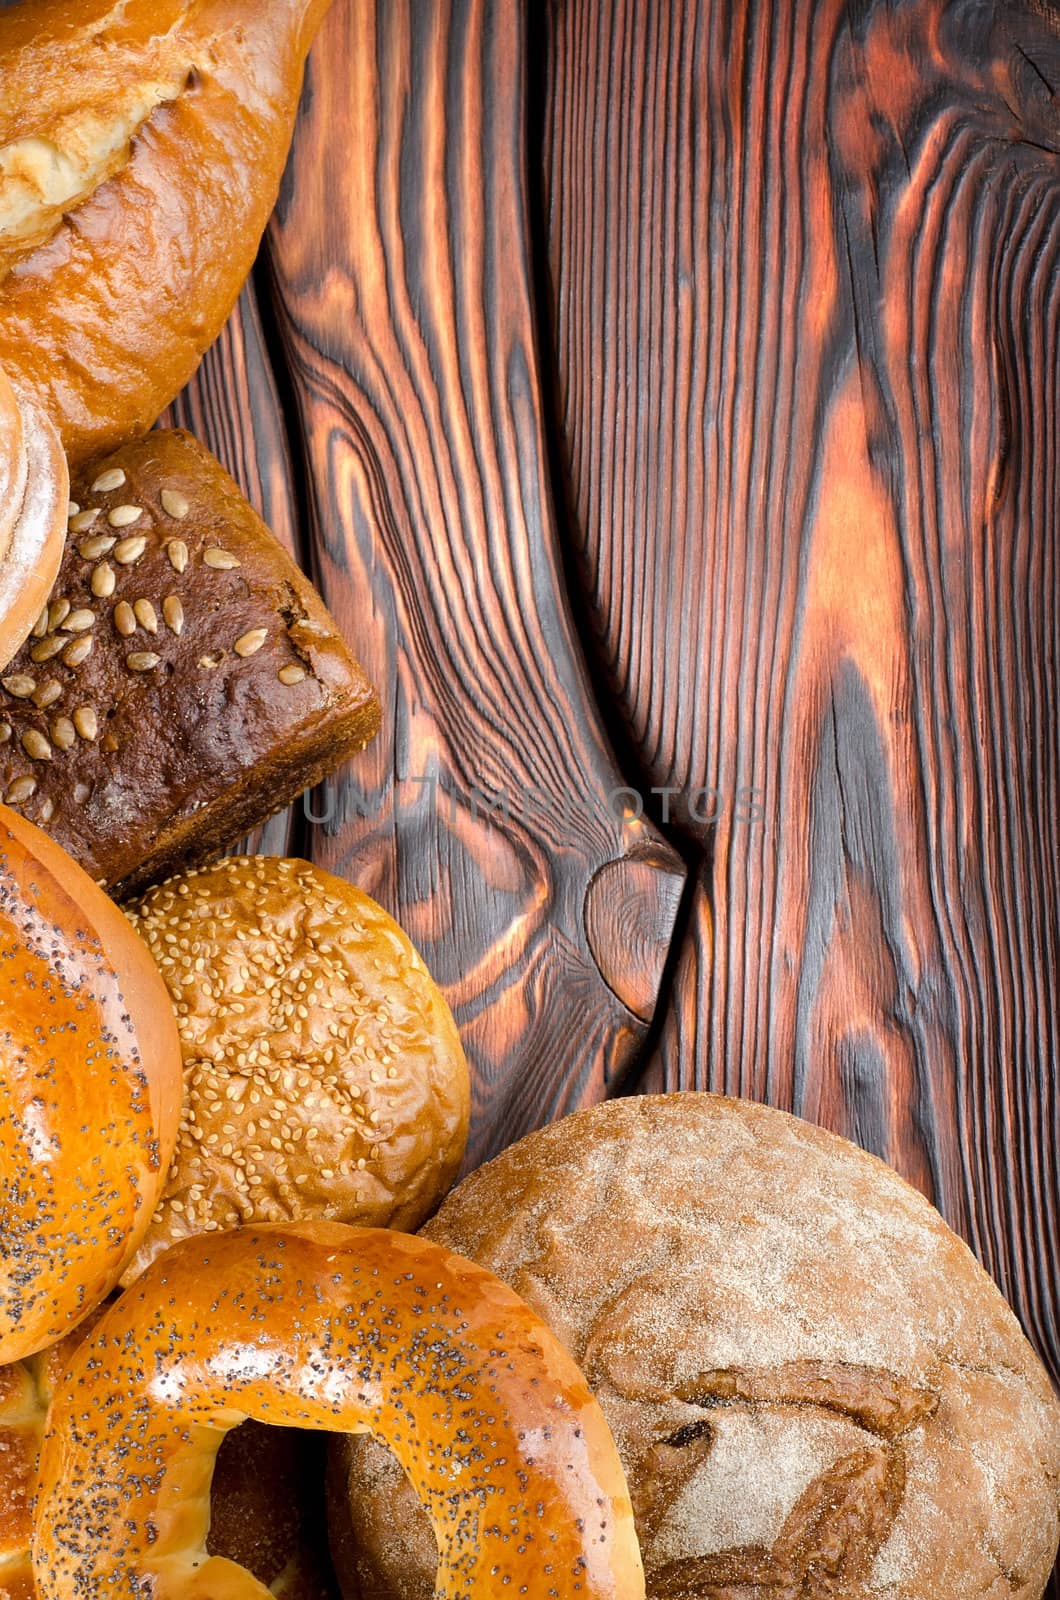 An assortment of bakery breads by Givaga